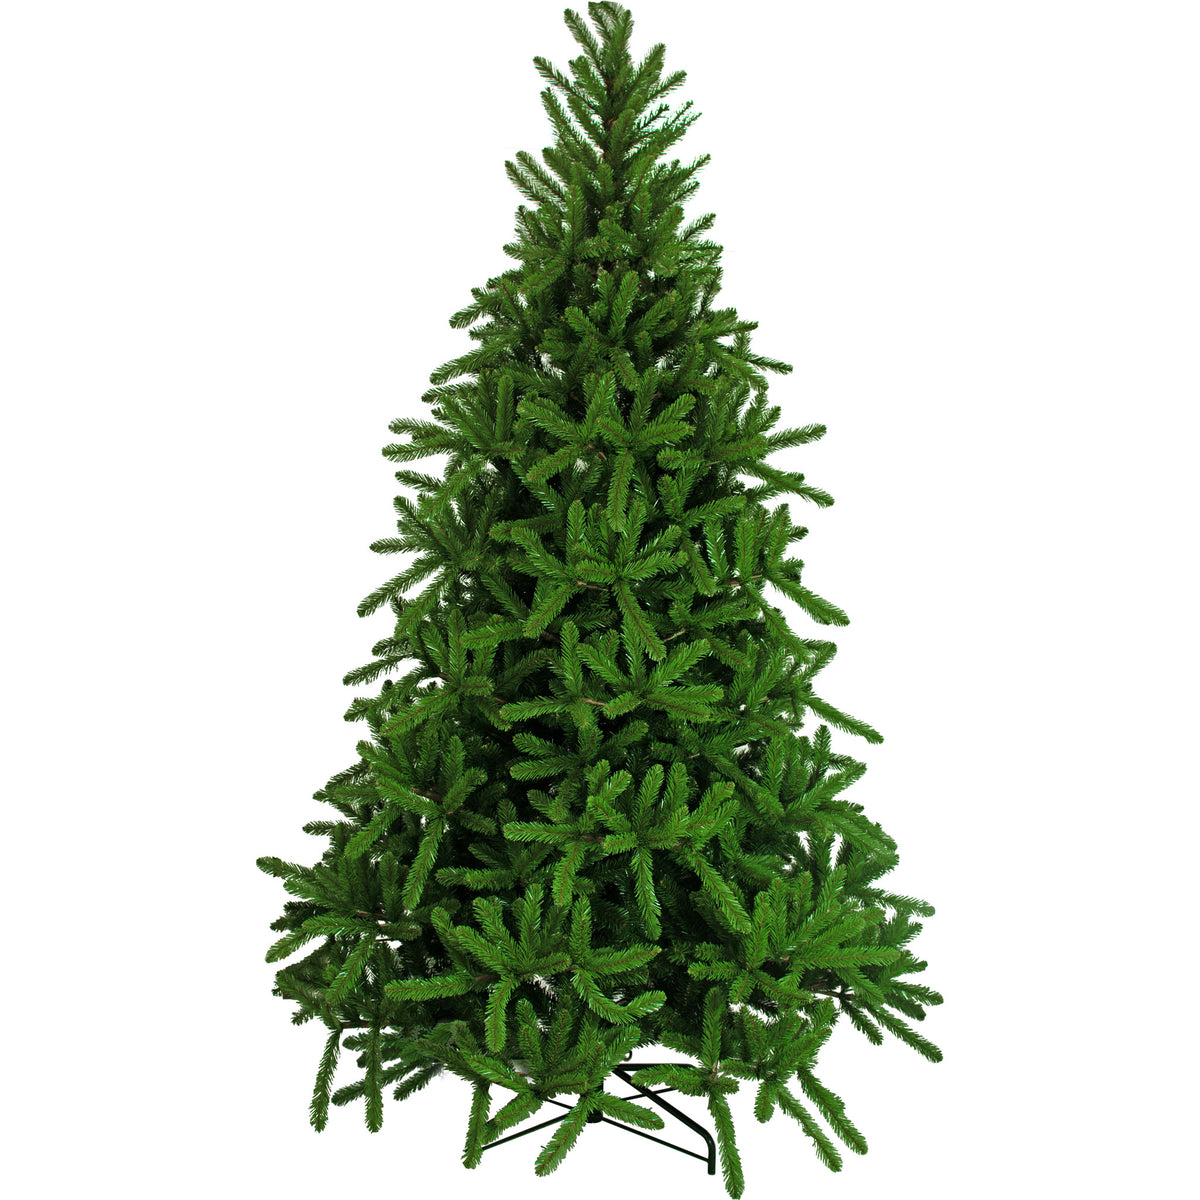 Introducing the Douglas Fir Tree from our Luxe Christmas Collection